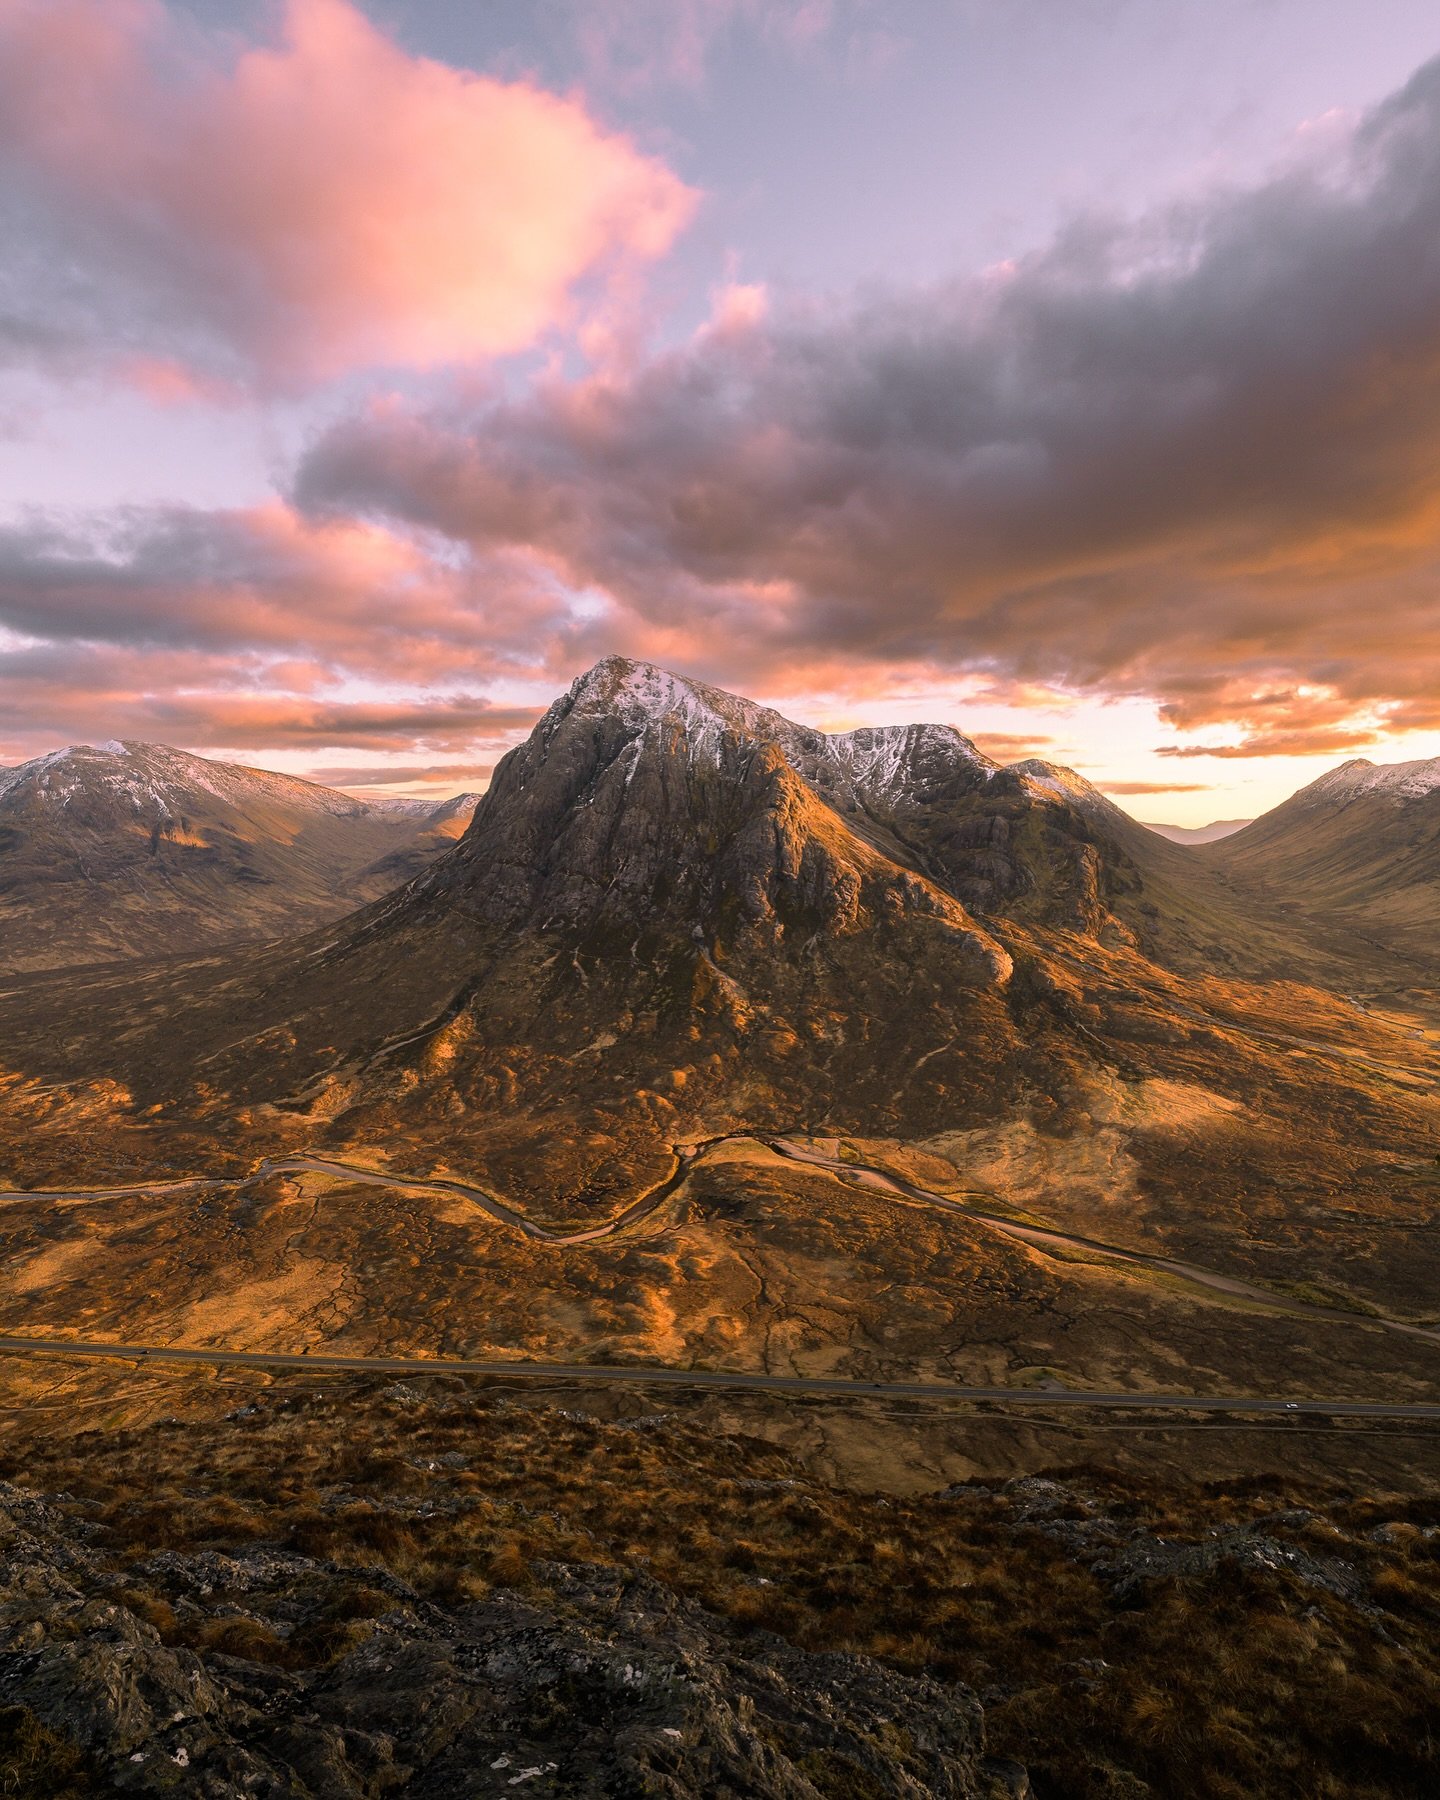 This was a shot that I&rsquo;ve wanted since taking up photography. We decided the day before to climb Beinn a&rsquo;Chrulaiste at about 16:00, just to make sure we had enough time for sunset. The climb was steep and involved a lot of scrambling. I&r